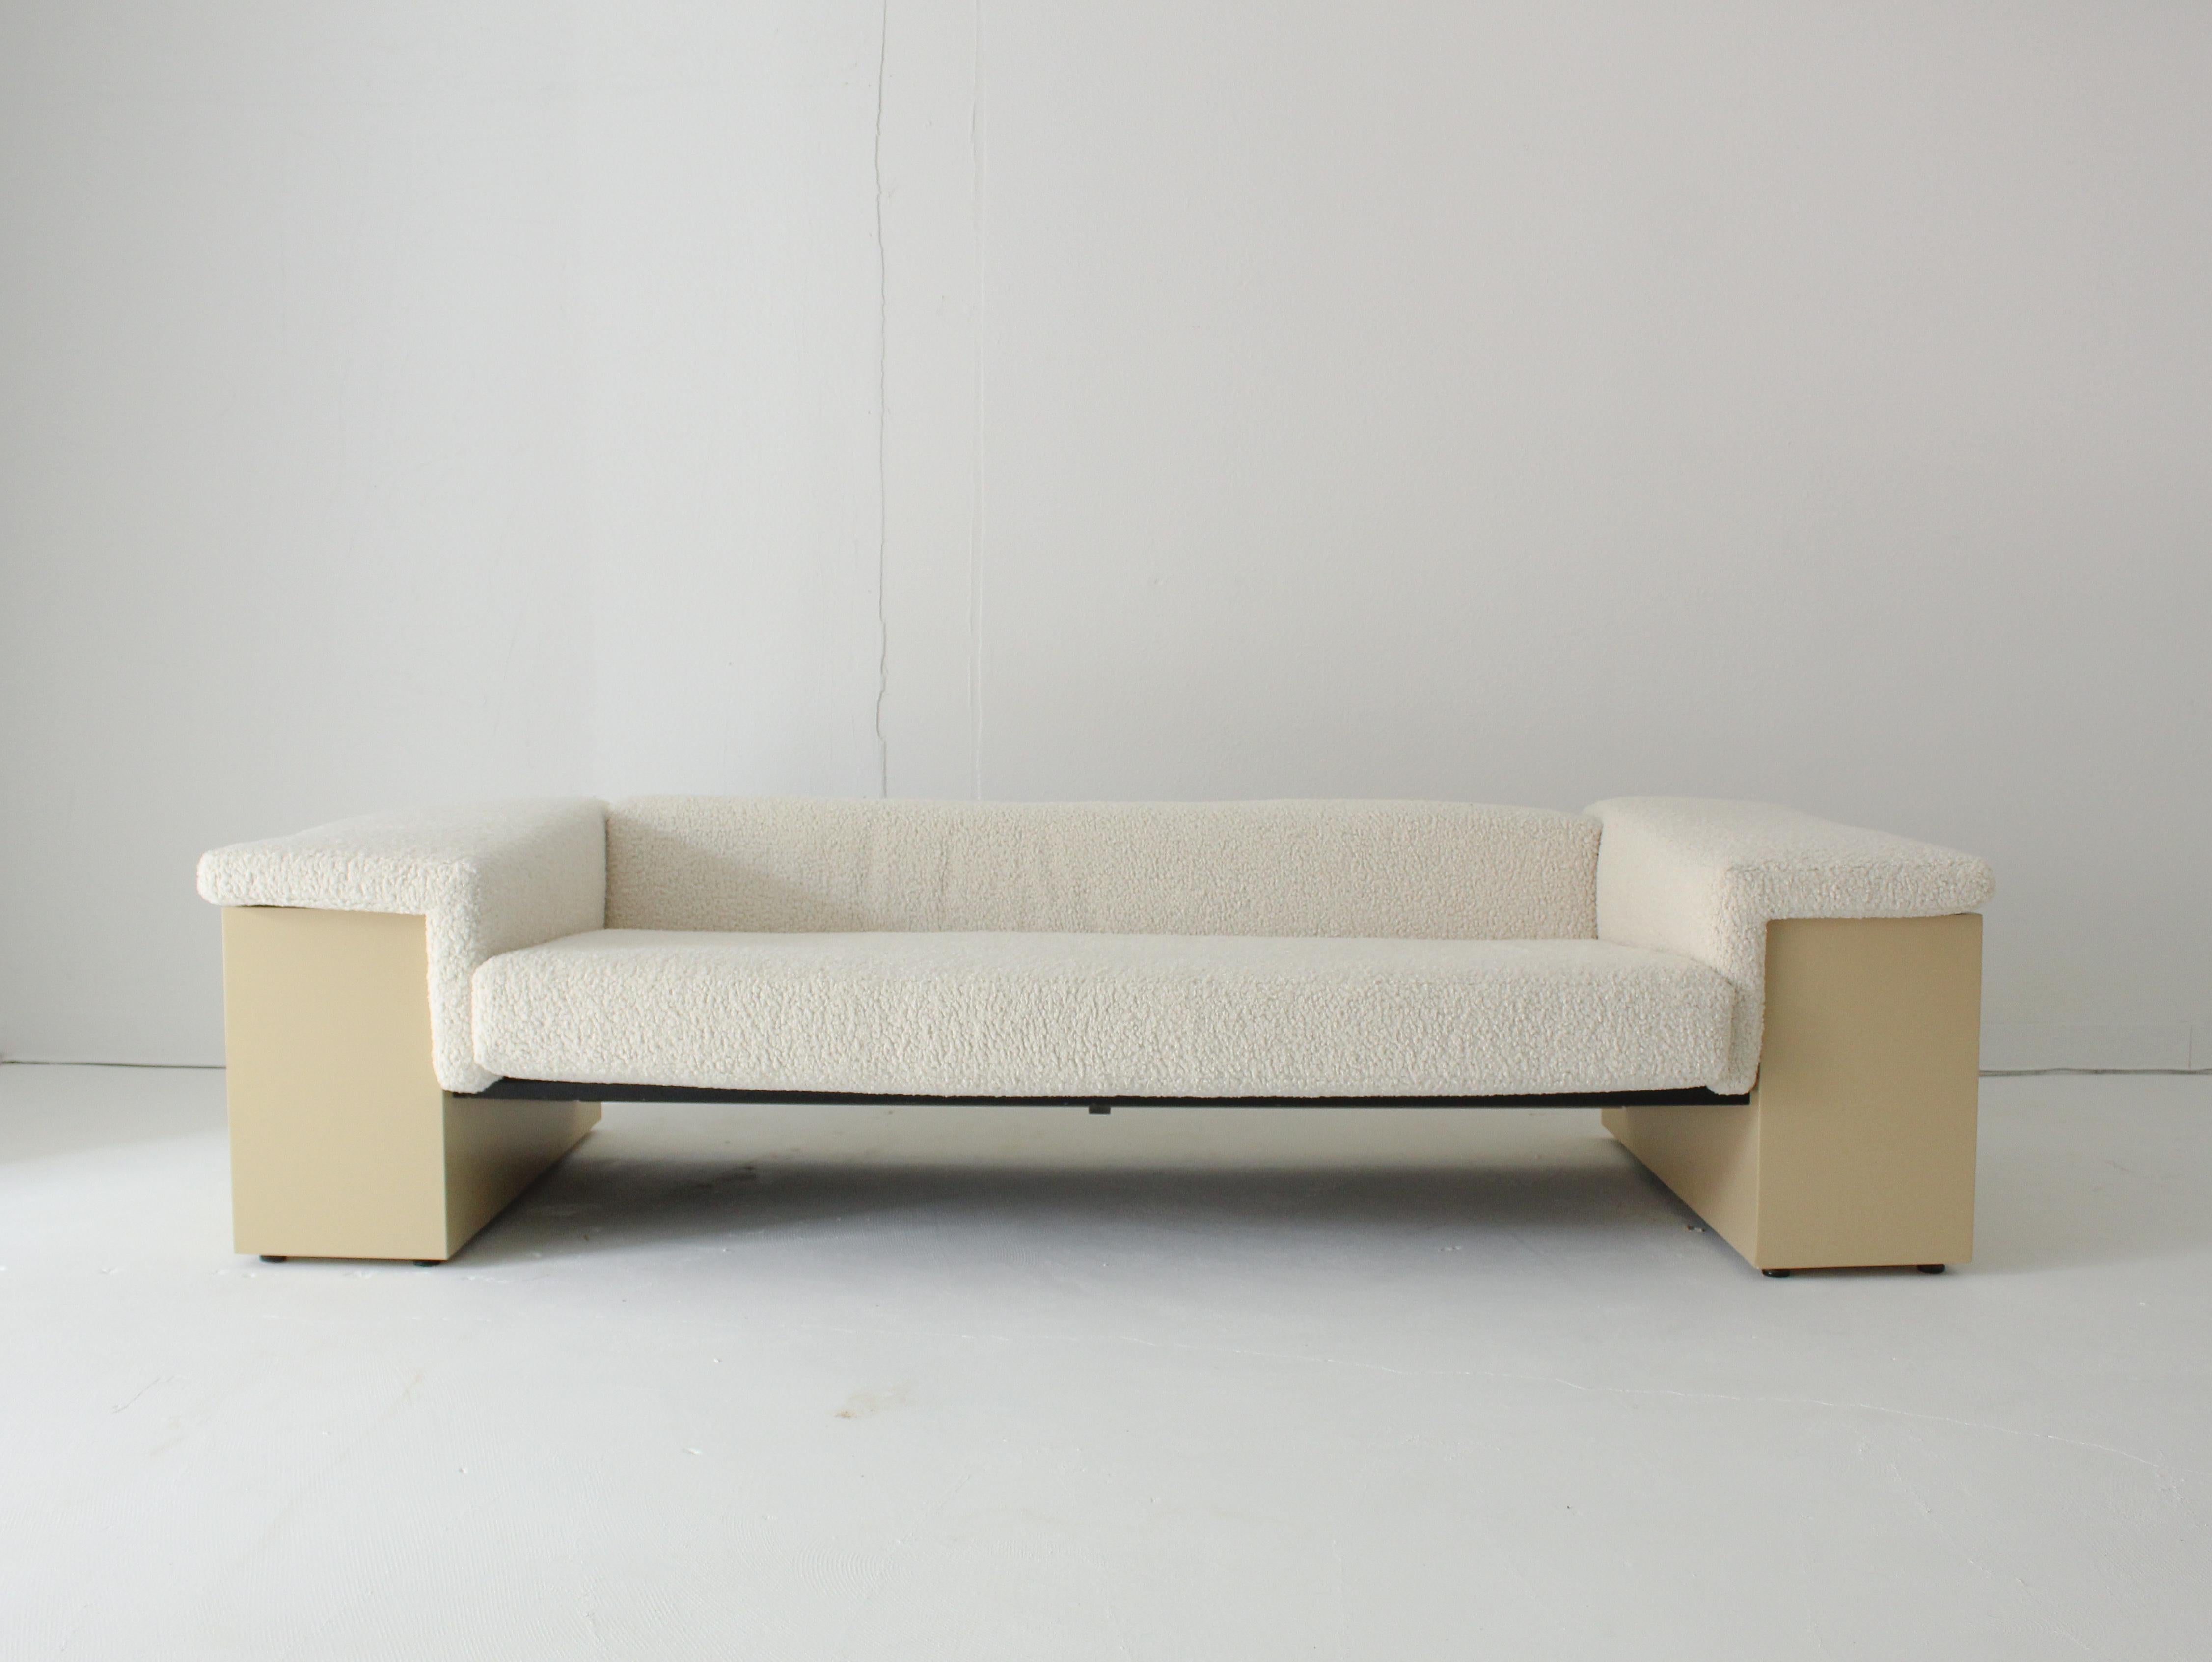 Beautiful award winning sofa designed by Italian Architect Cini Boeri for Knoll in 1977. This was the low back and largest sofa from the Brigadier Lounge Collection, The Brigadier Sofa has architectural dignity and richness that reflects the refined